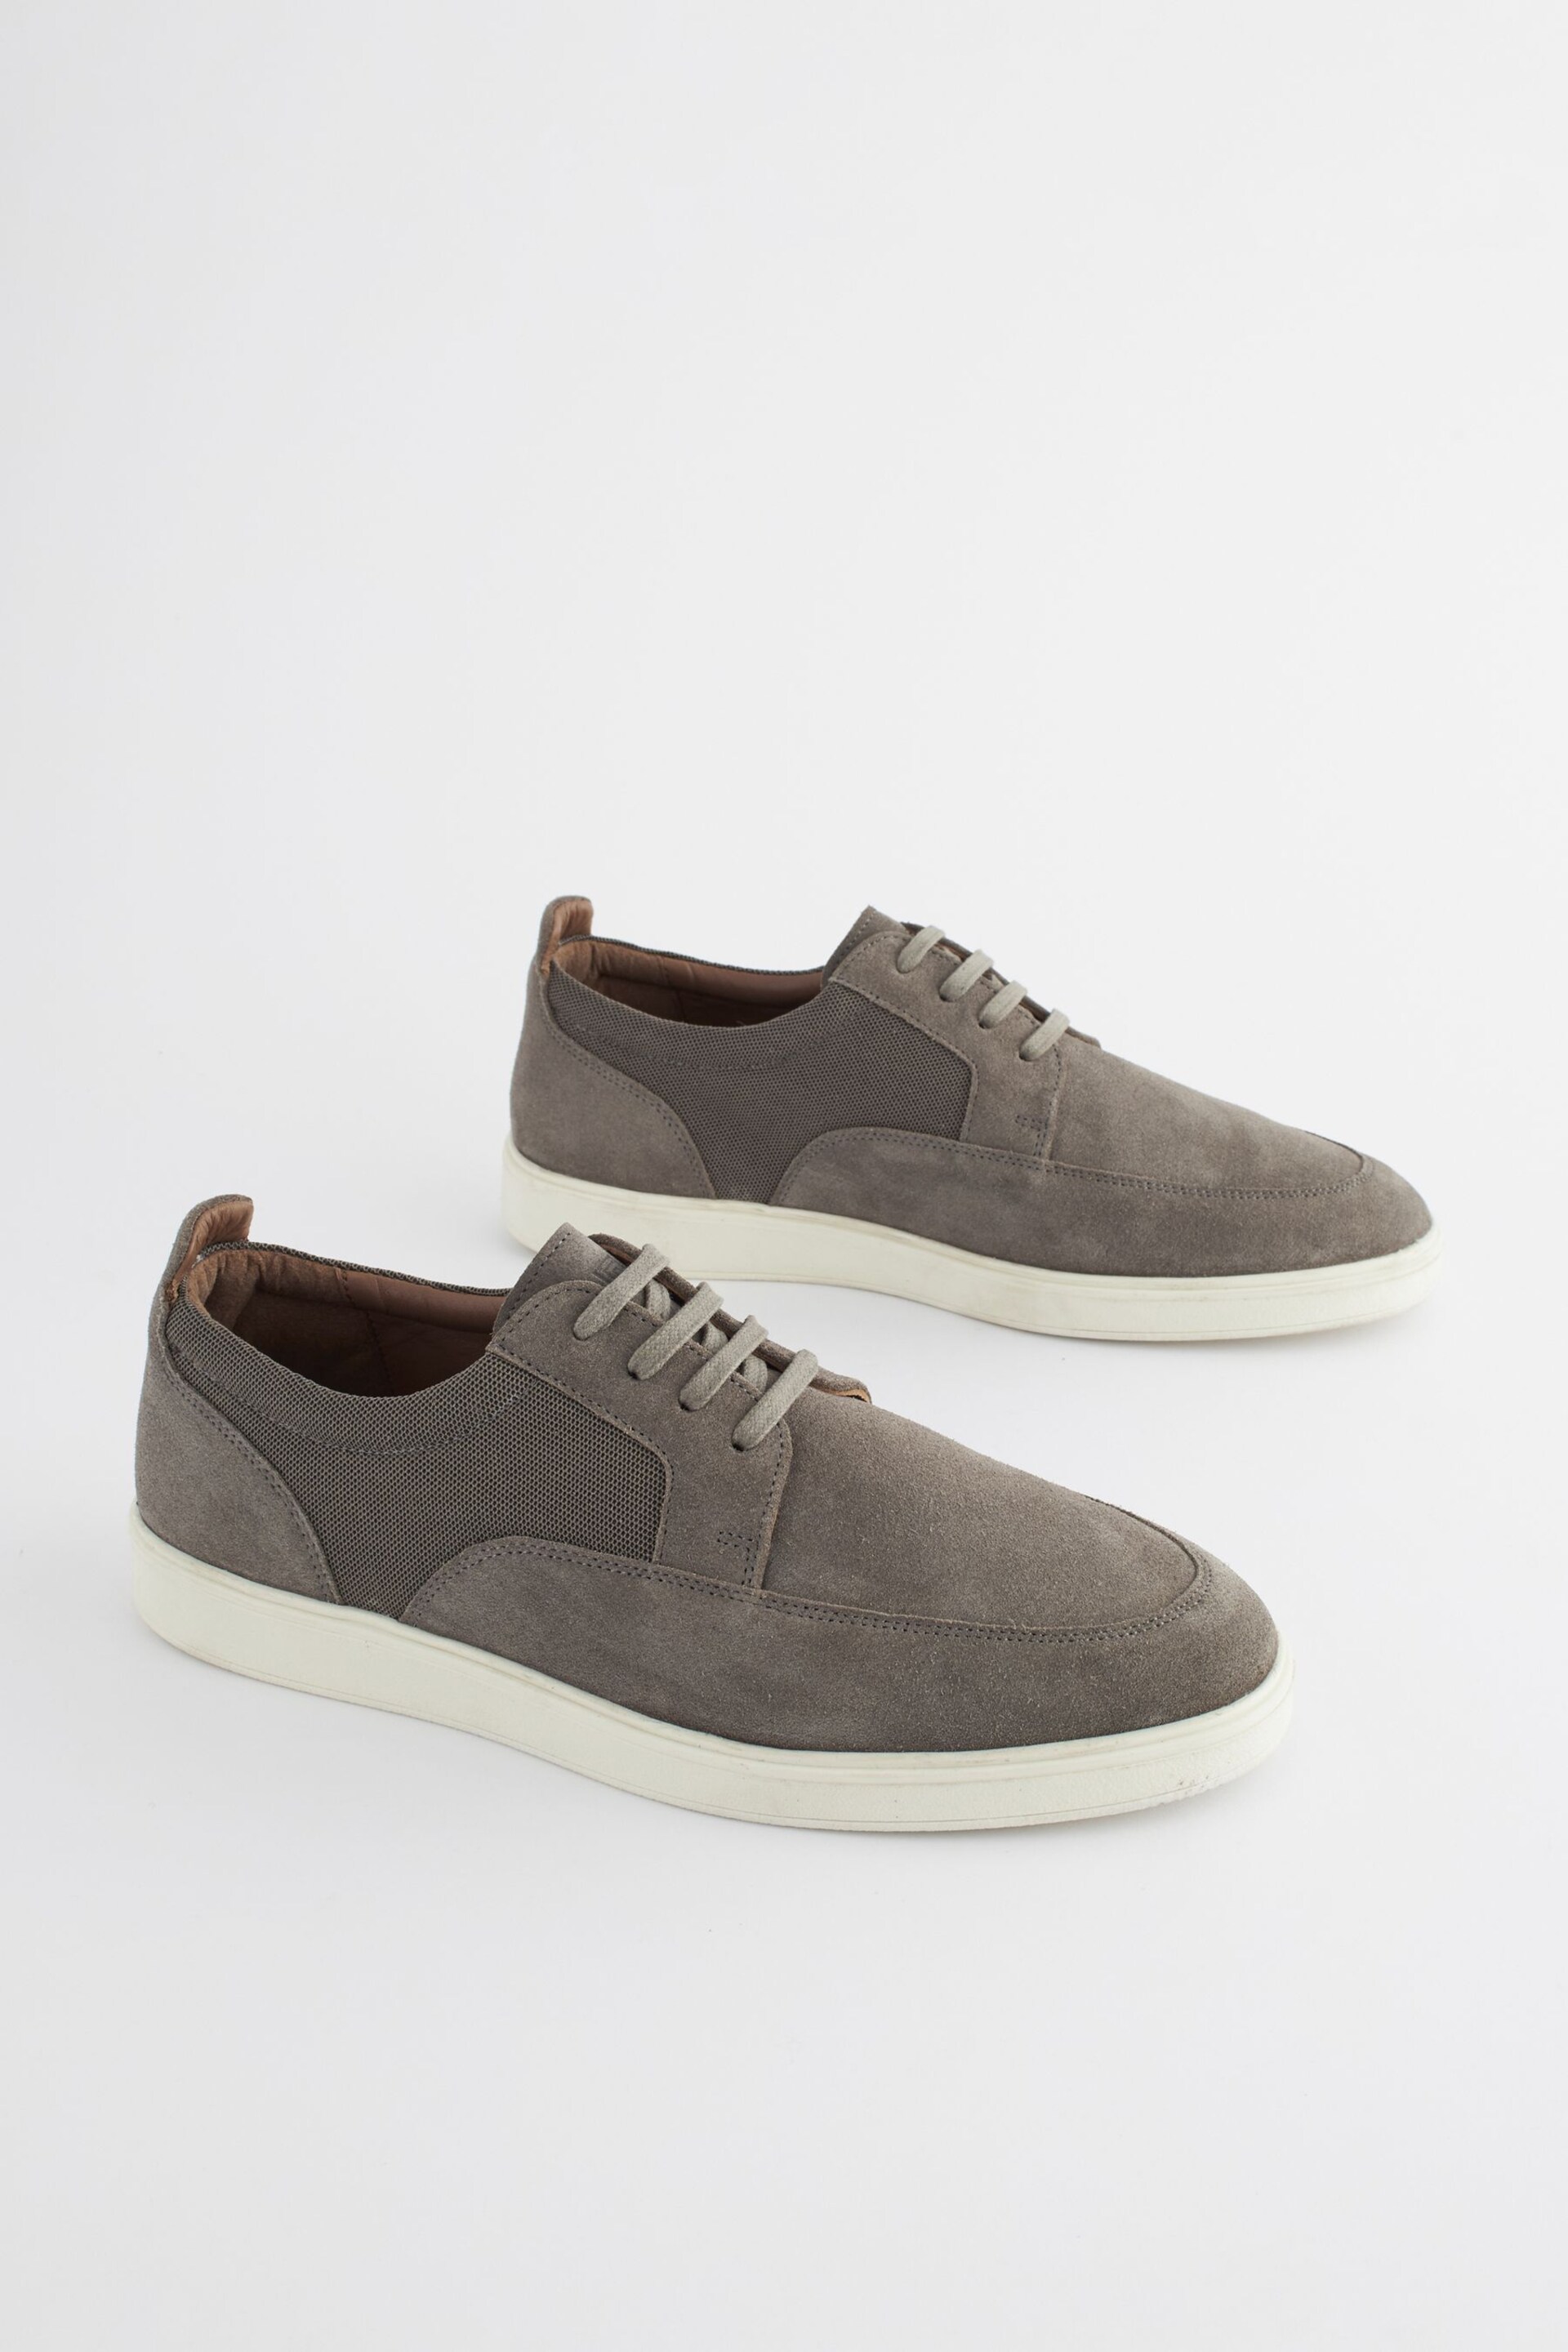 Grey Suede Cupsole Casual Shoes - Image 1 of 7